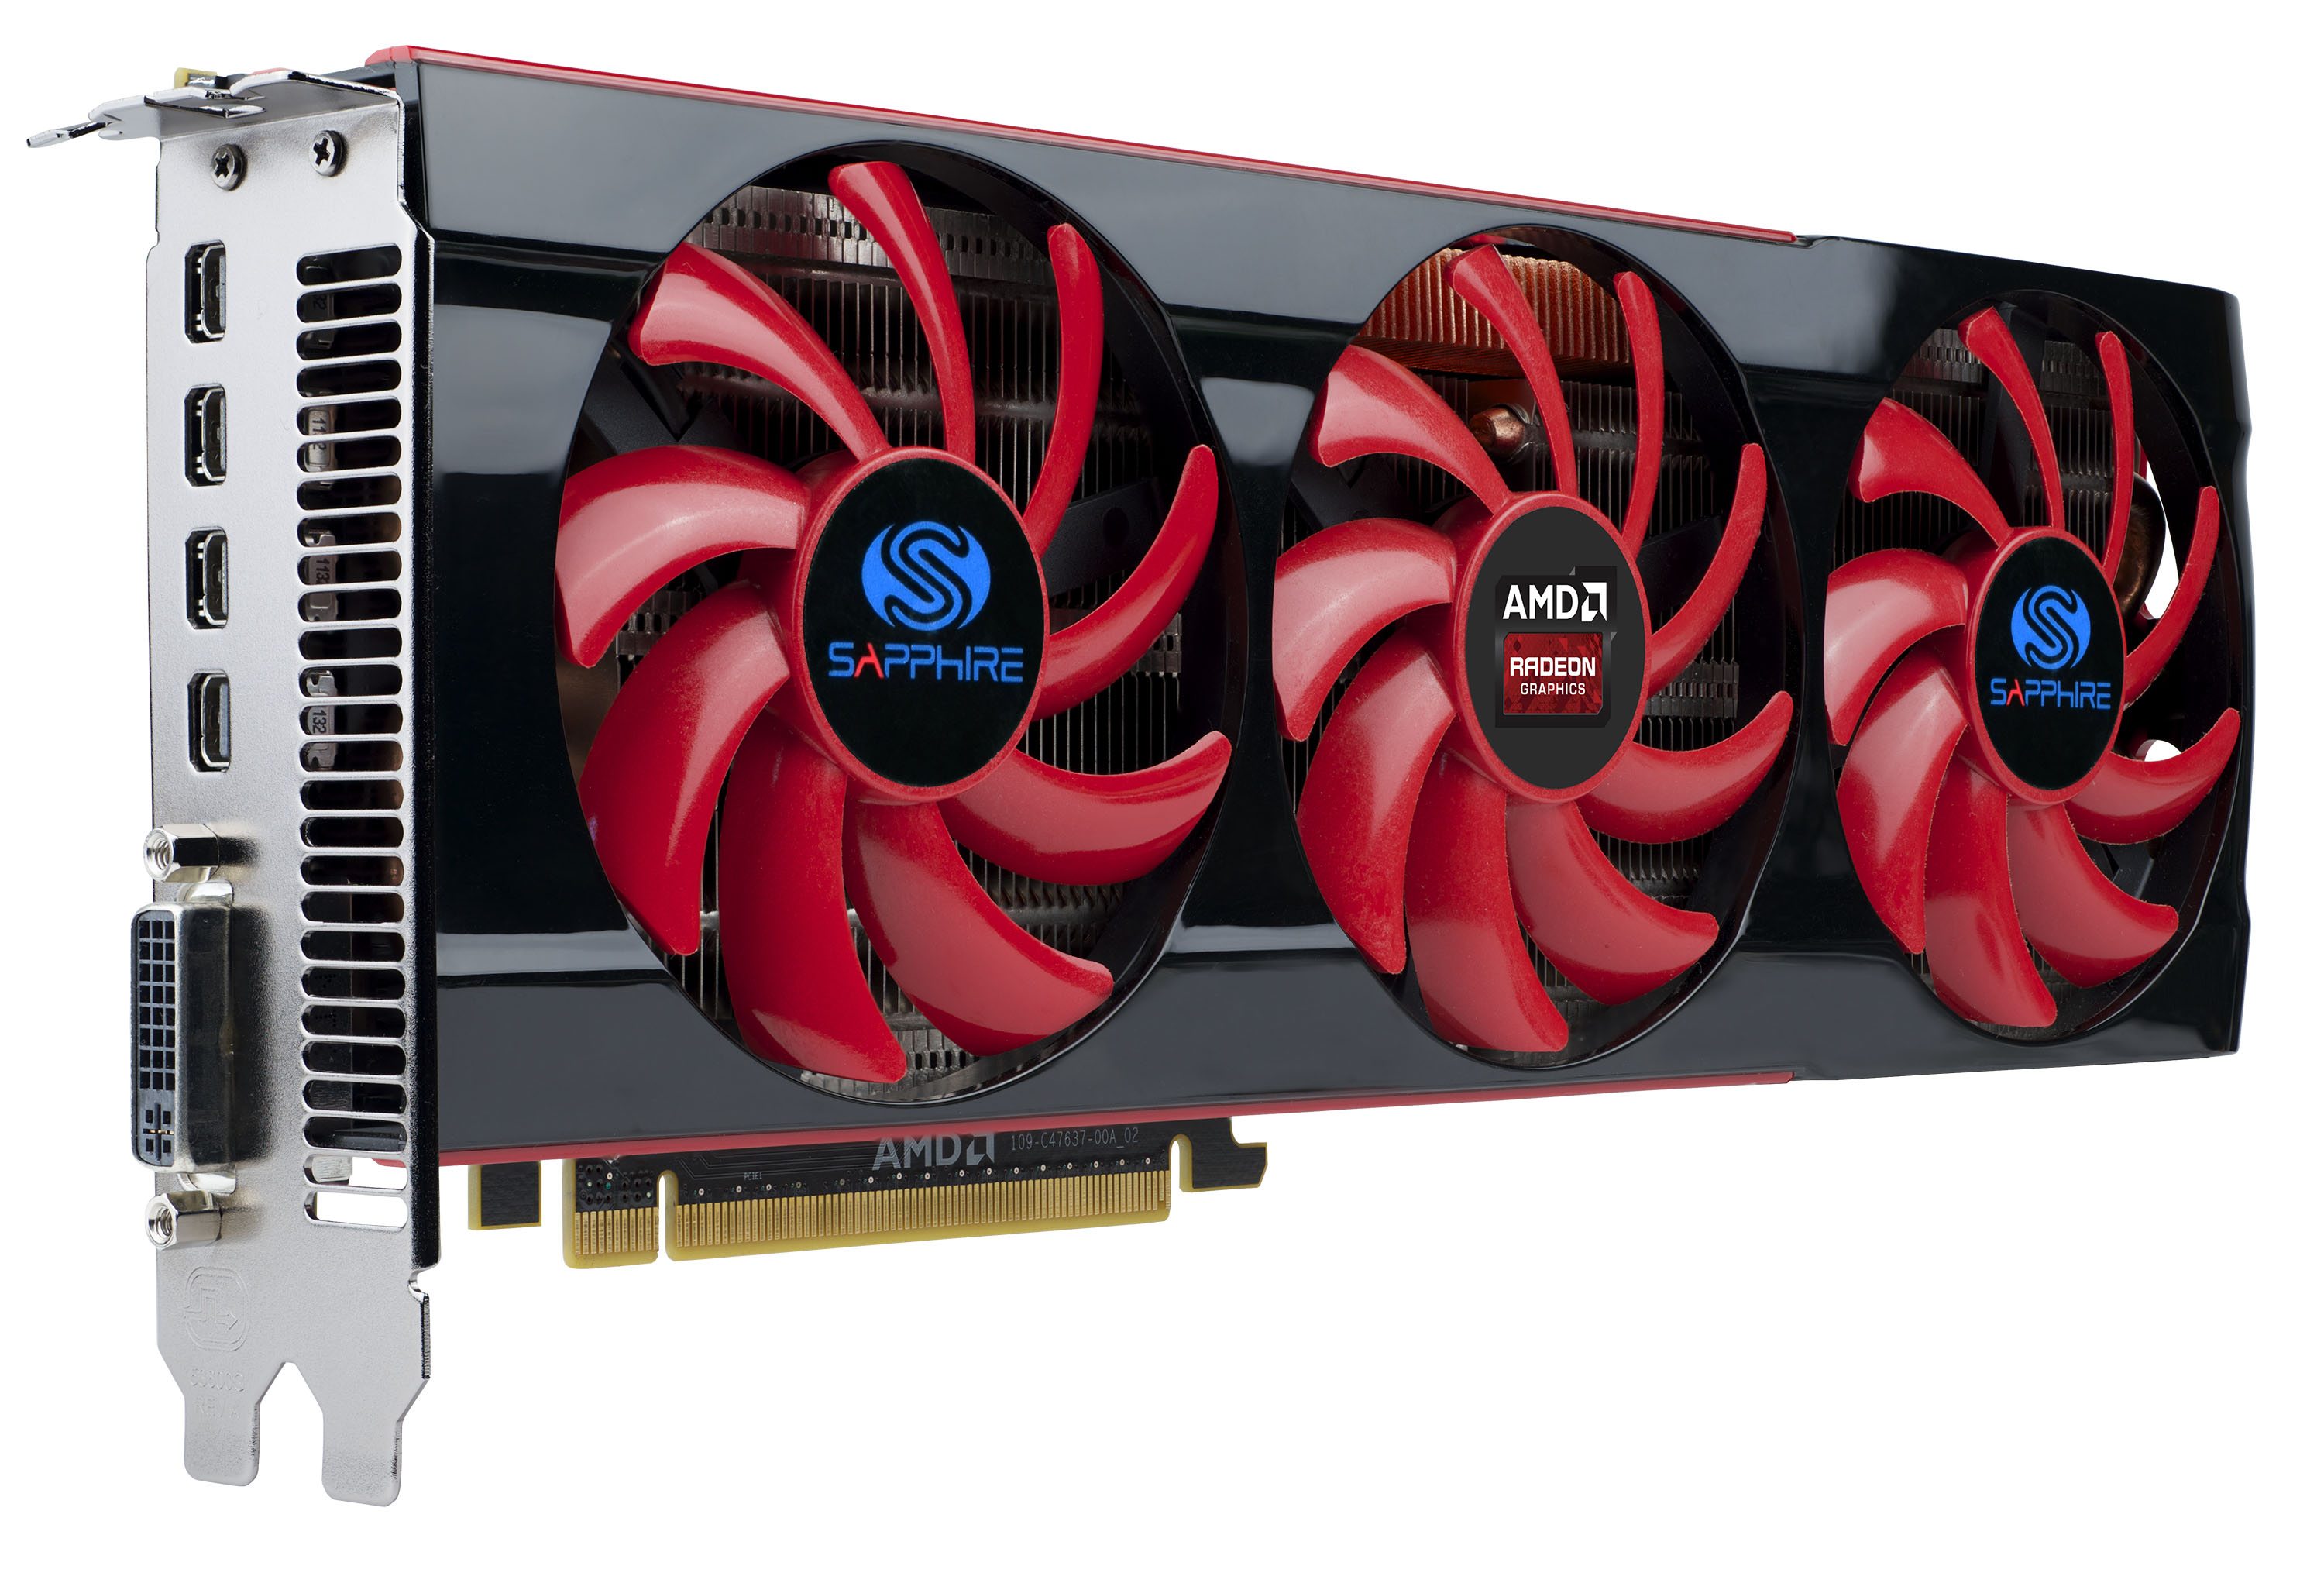 AMD and SAPPHIRE Releases The SAPPHIRE HD 7990 AMD, Sapphire, Video Card 2